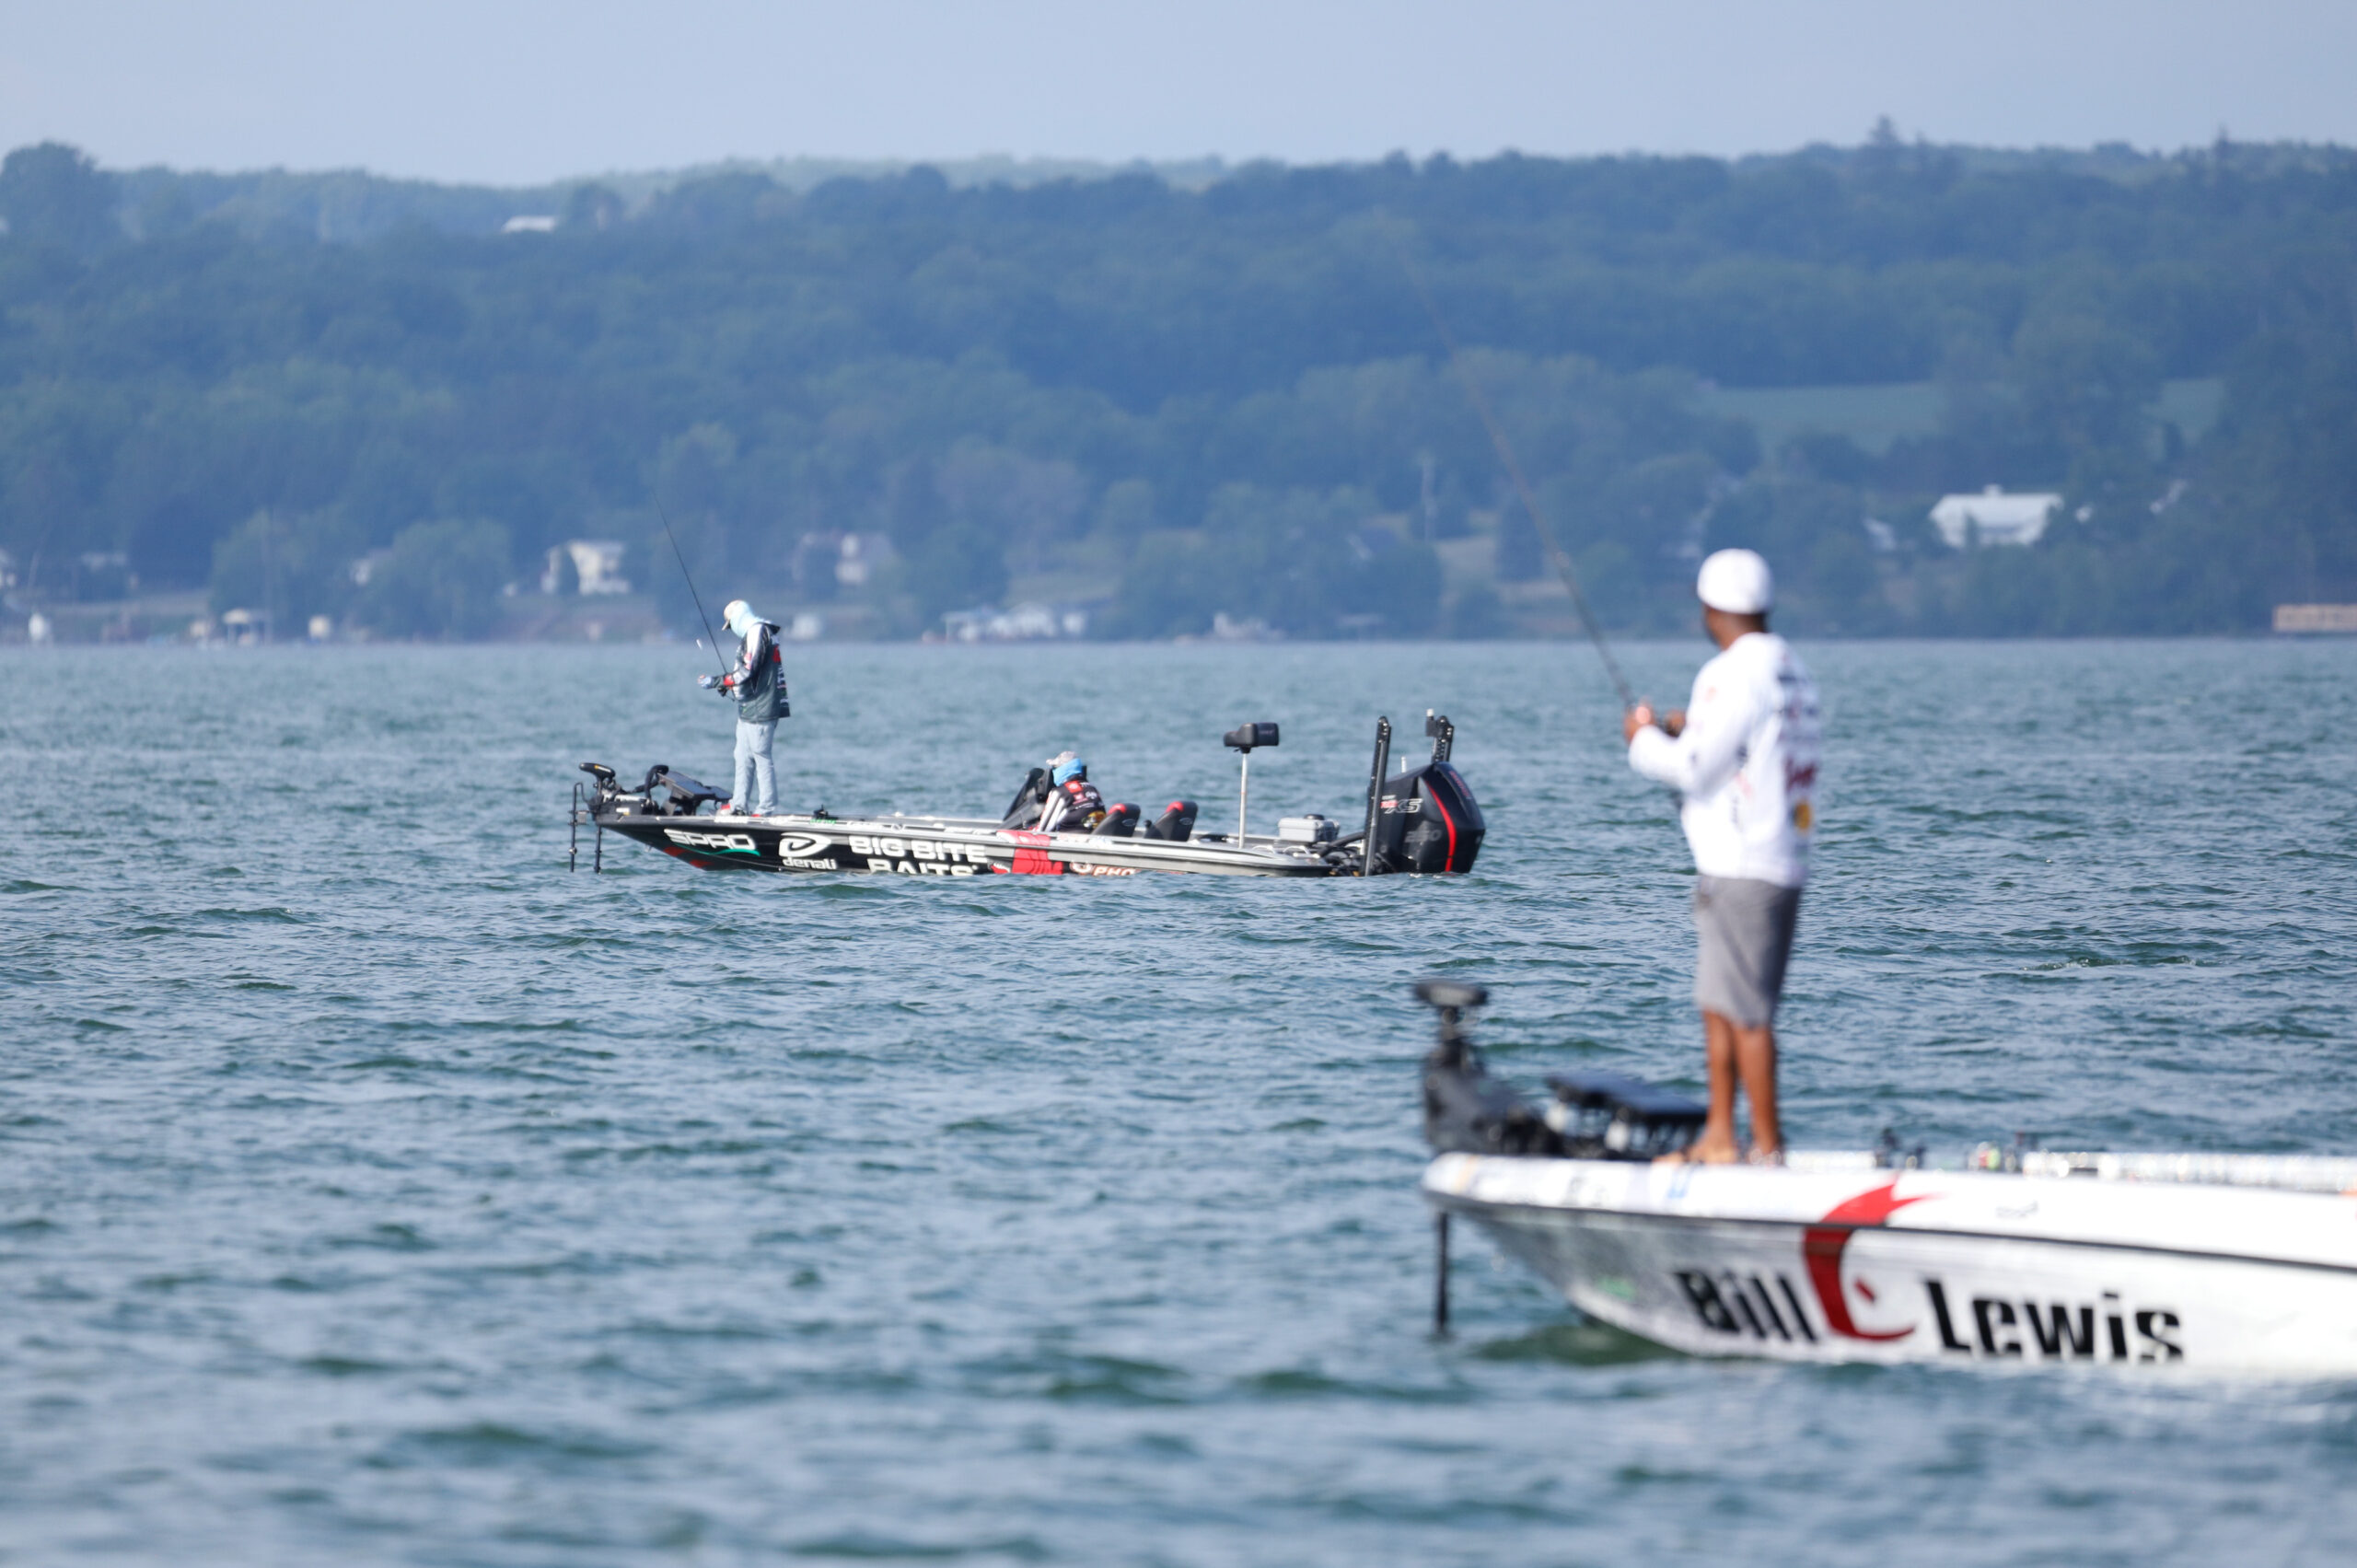 Michael Neal Leads Early for Group B at MLF Bass Pro Tour Fox Rent A